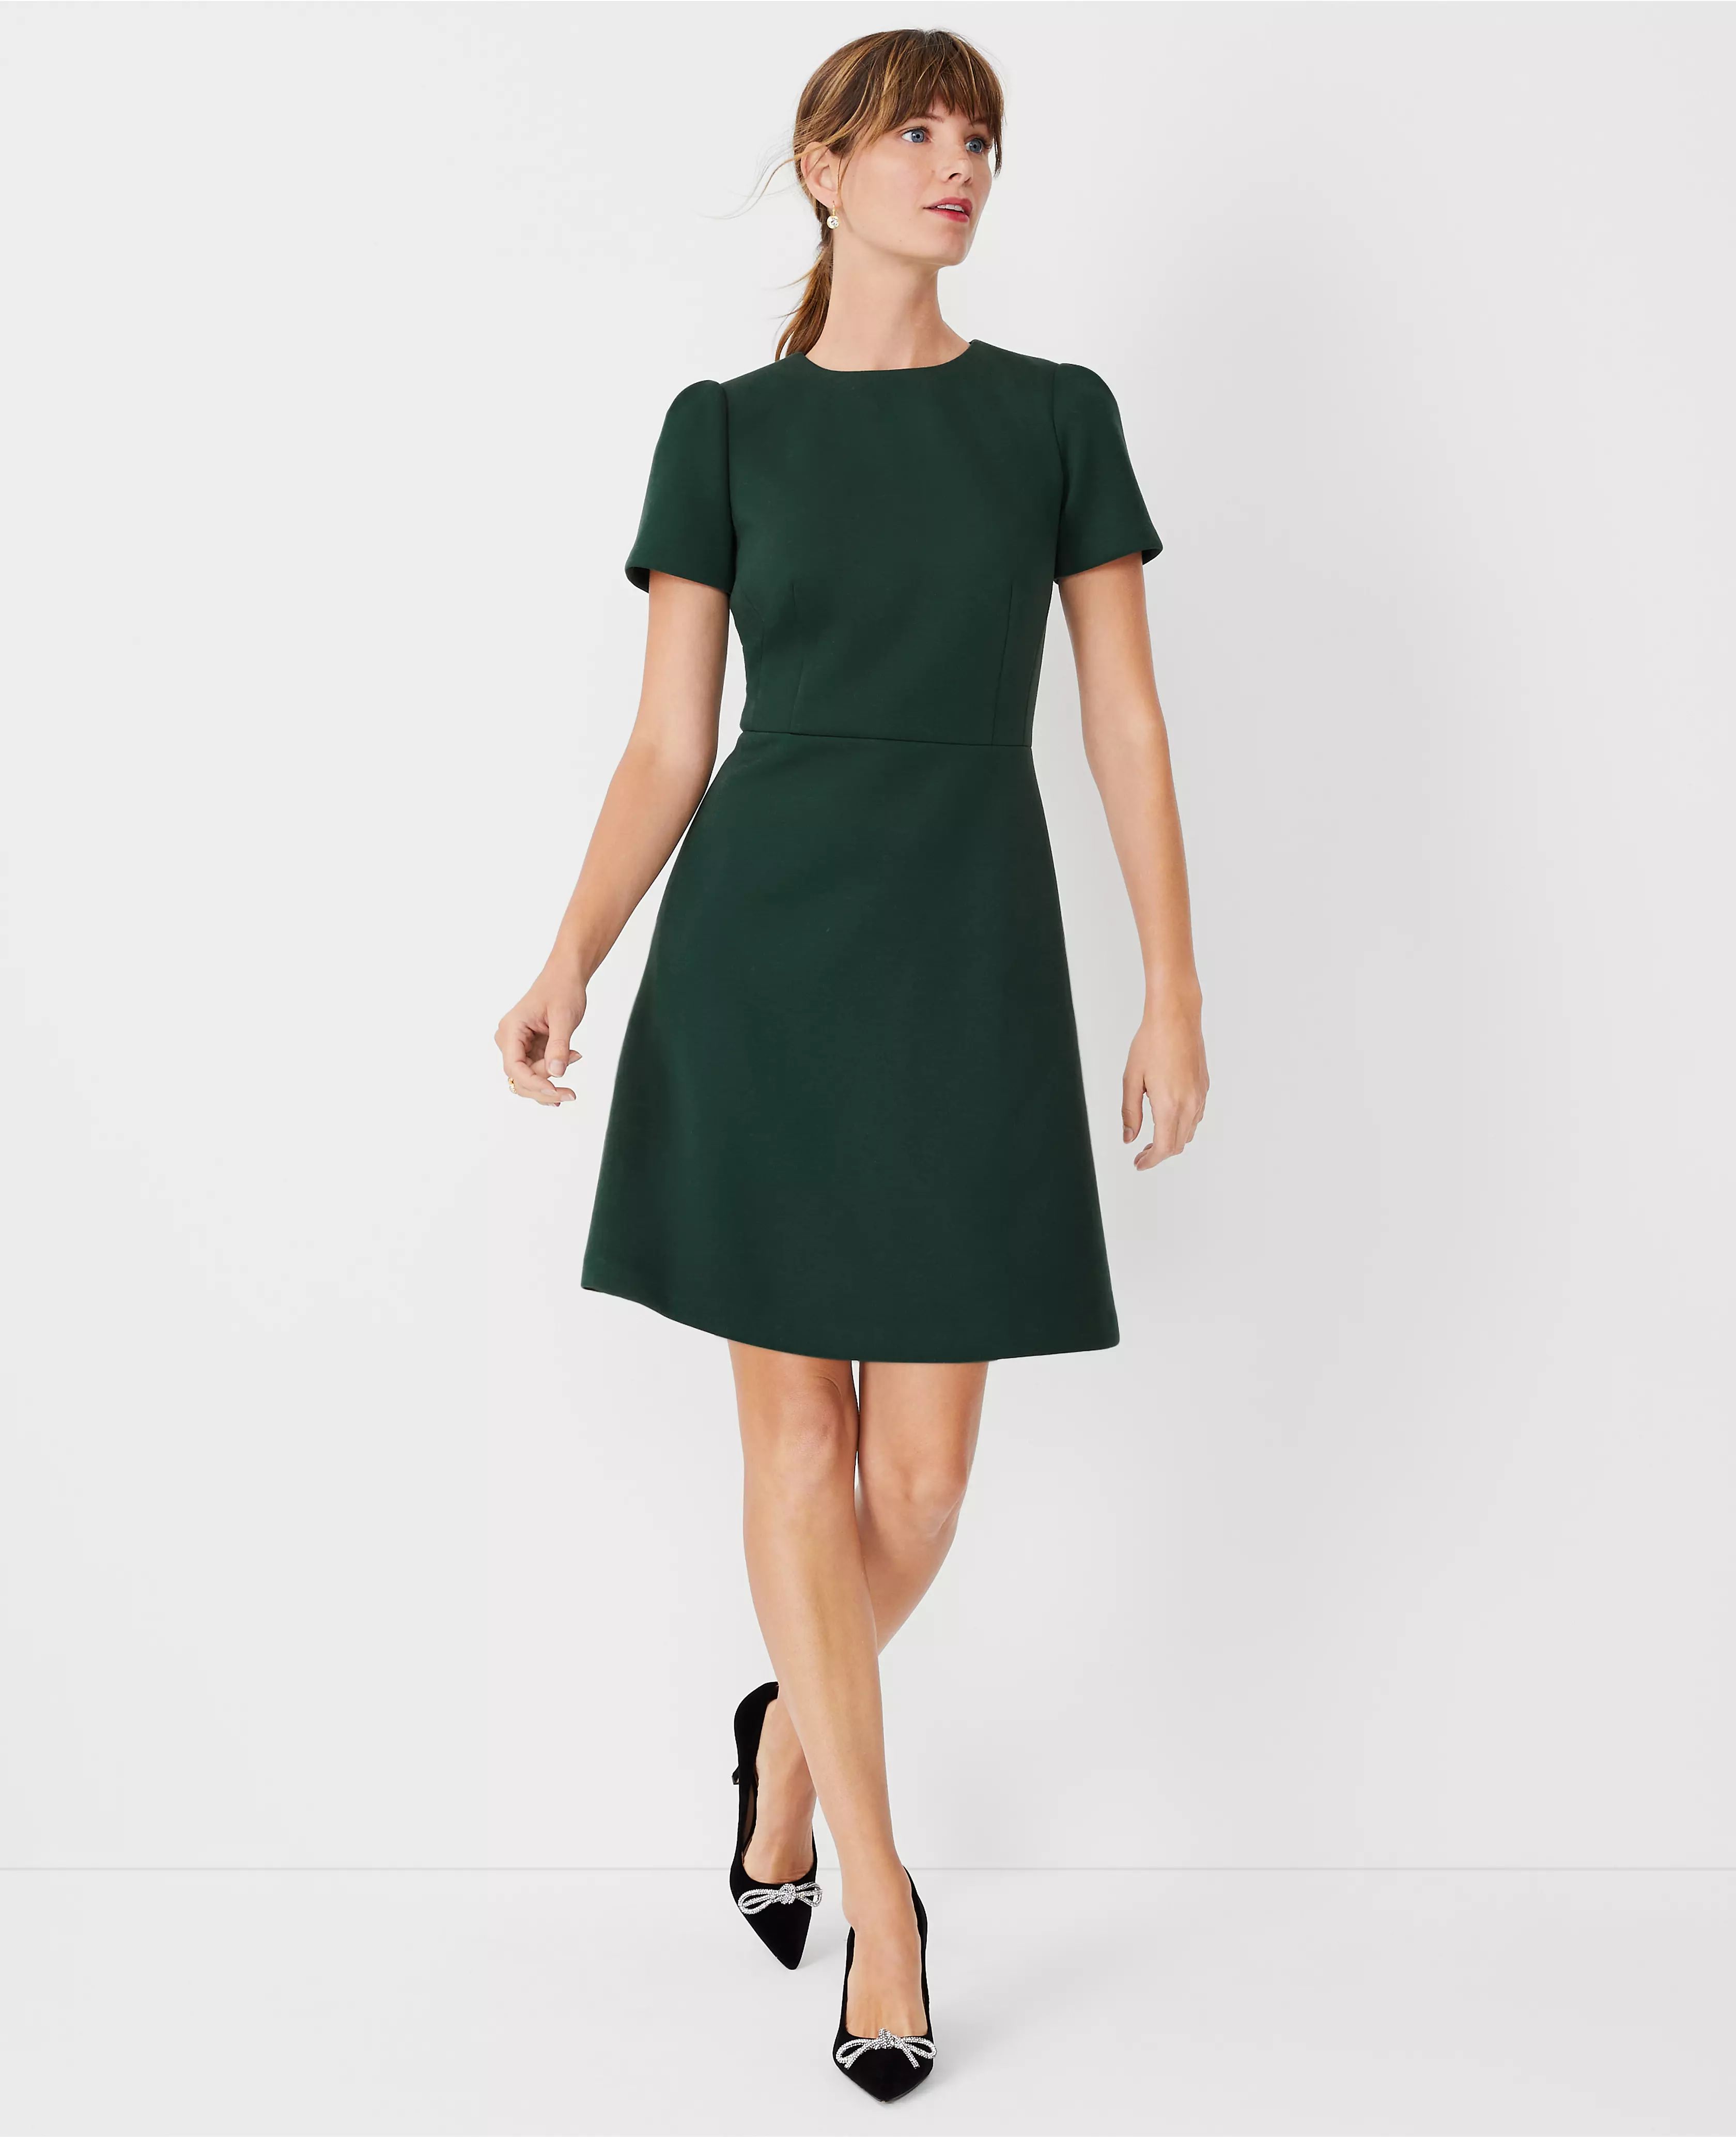 The Crew Neck A-Line Dress in Double Knit | Ann Taylor (US)